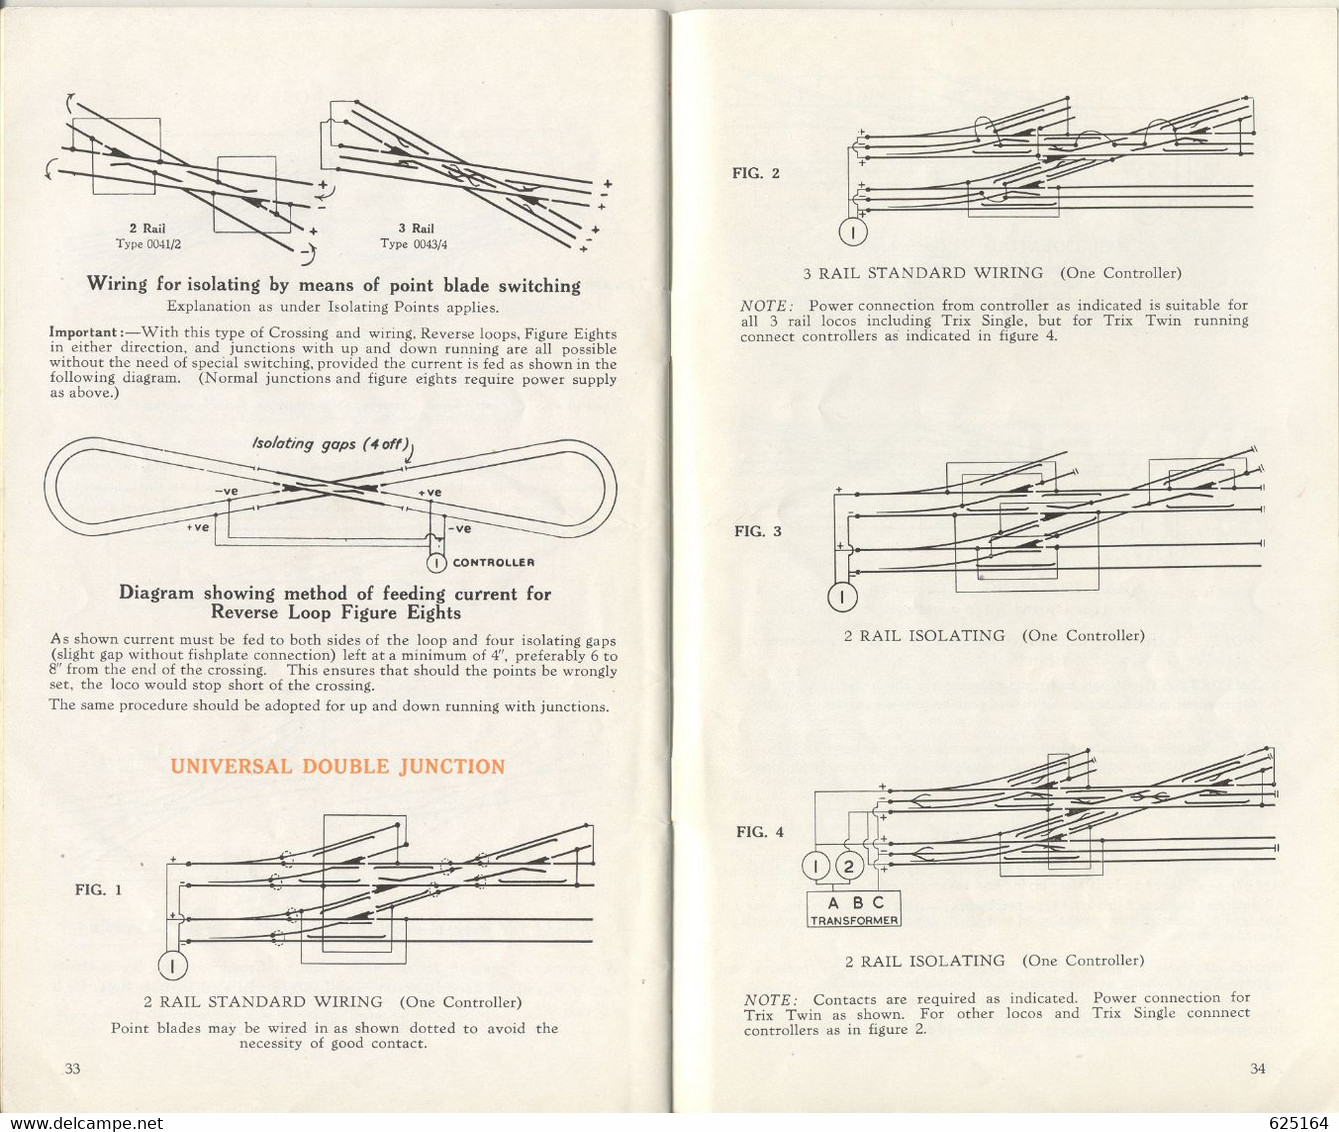 Catalogue WRENN 00 GAUGE TRACK WORK 1960s For Permanent Layouts - Anglais